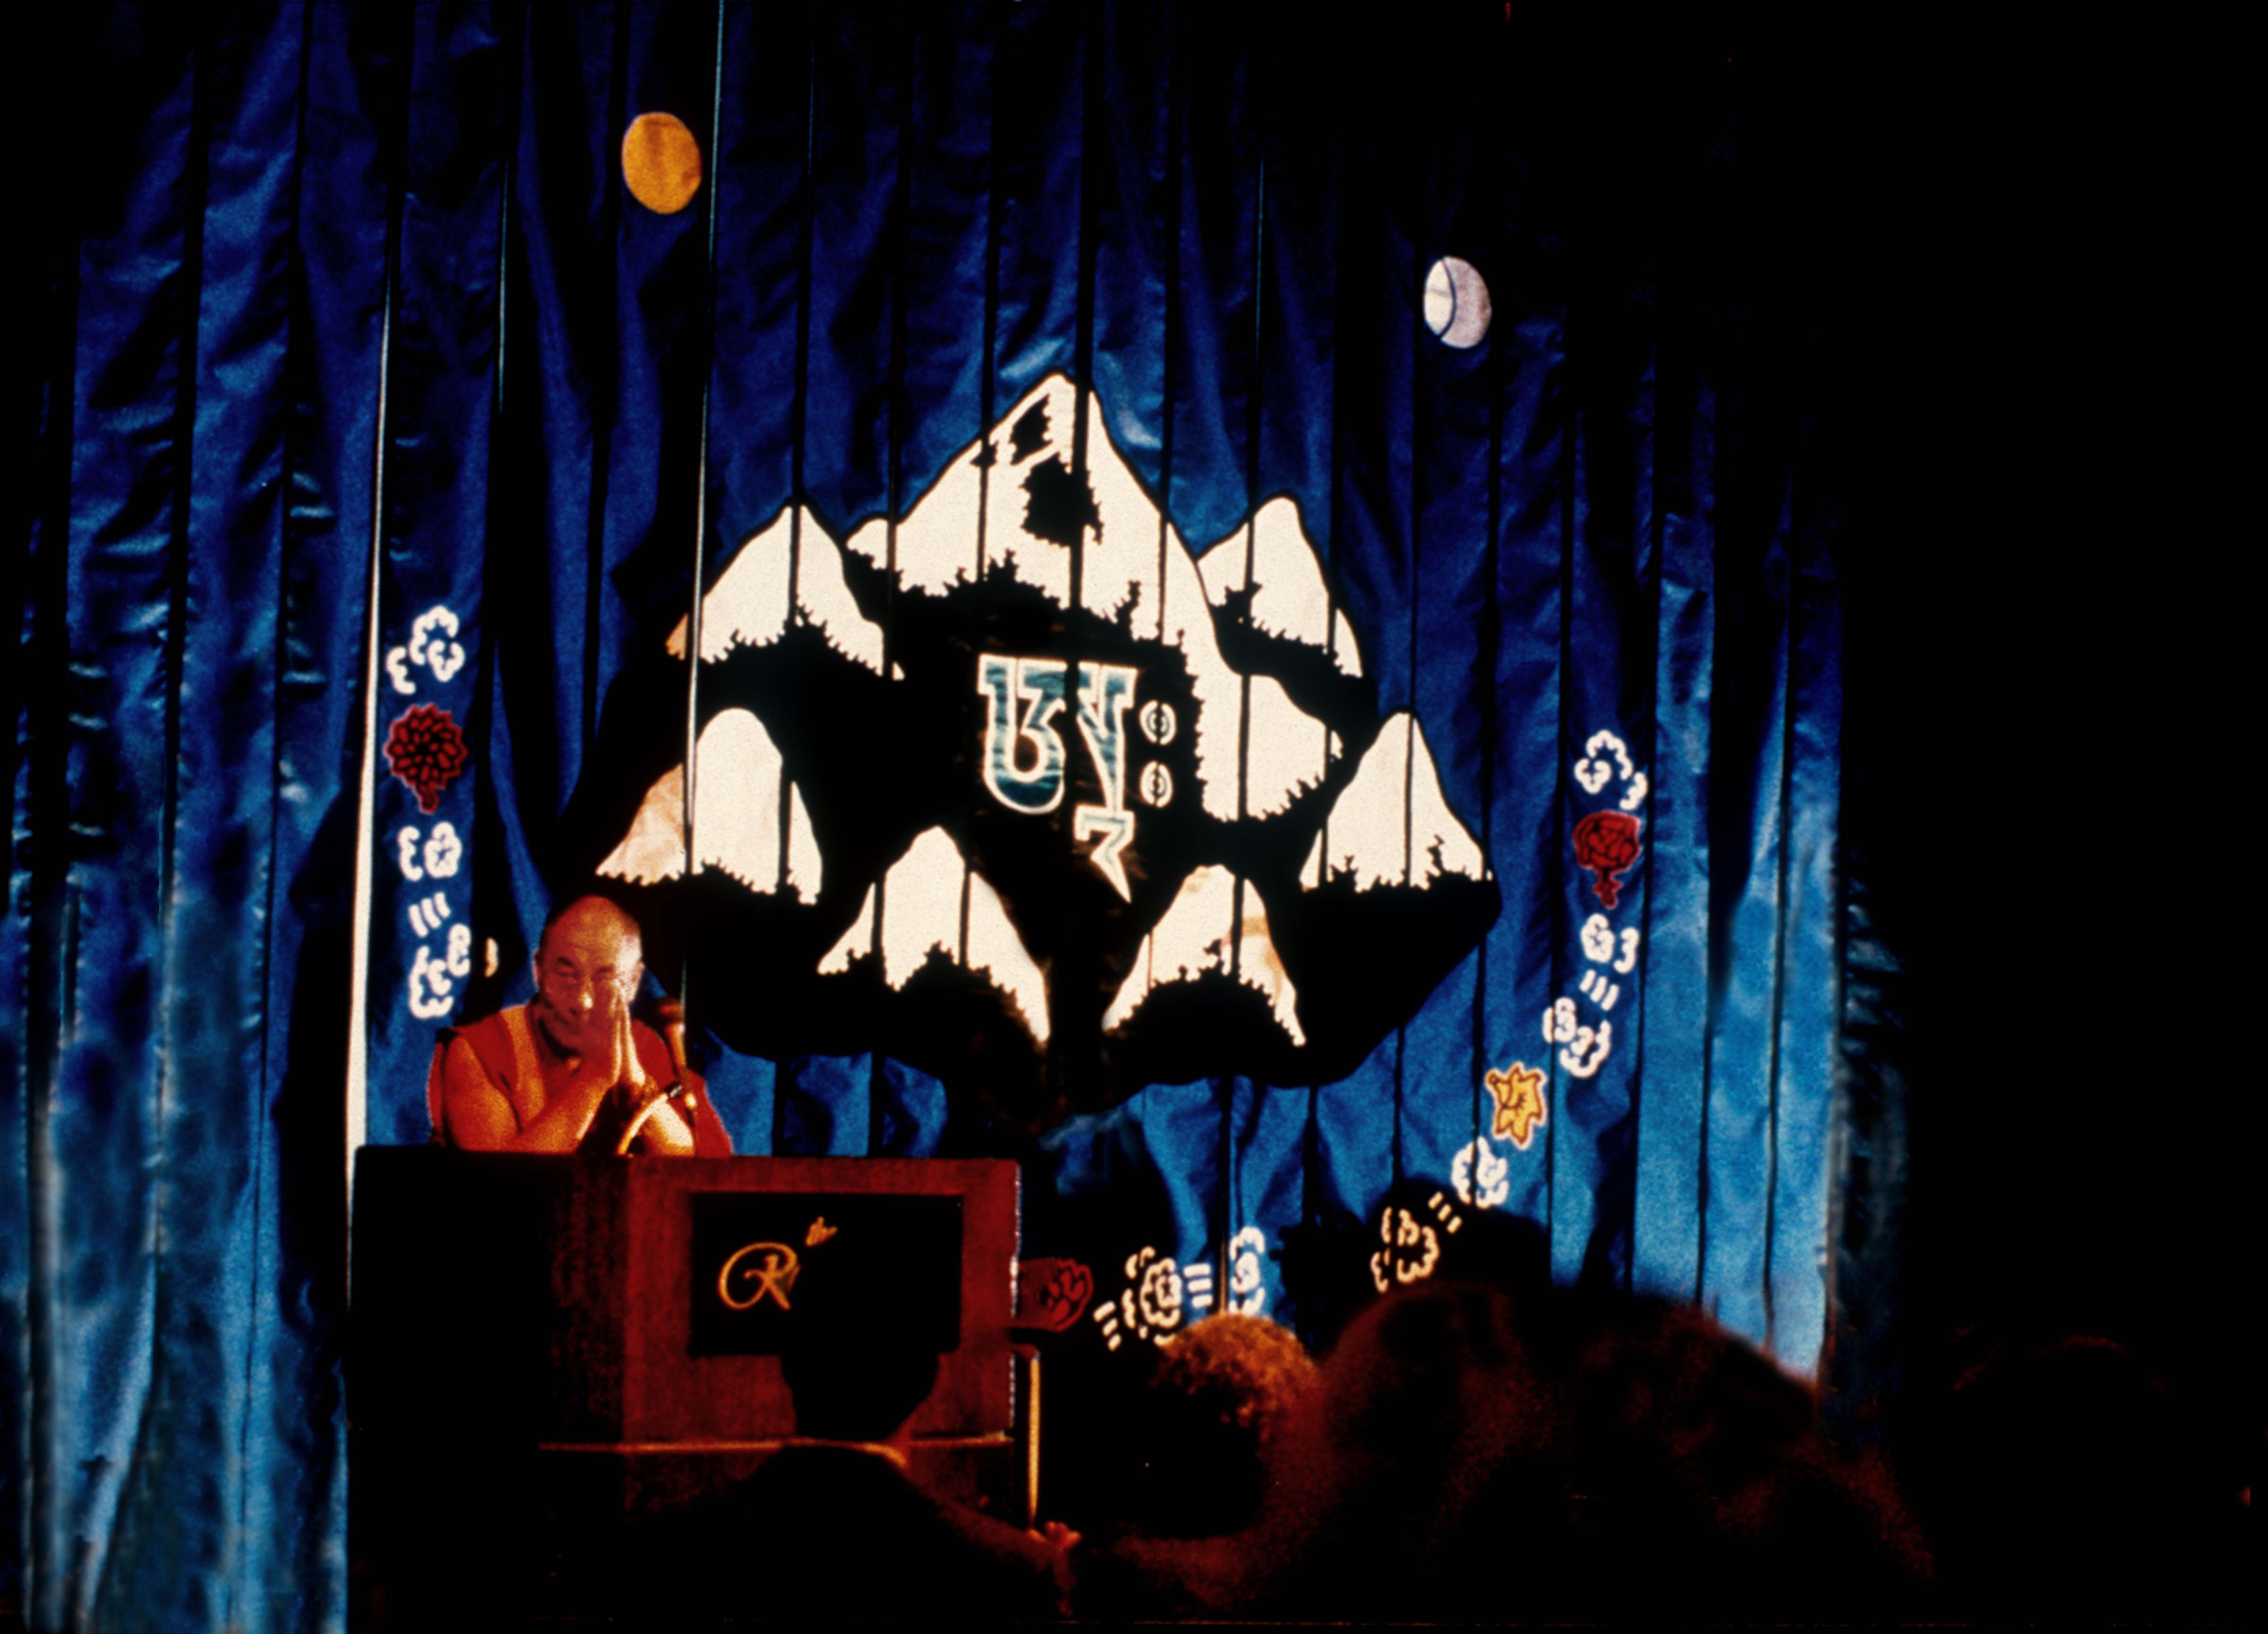 Dalai Lama Speaking in front of Seven Summits Banner